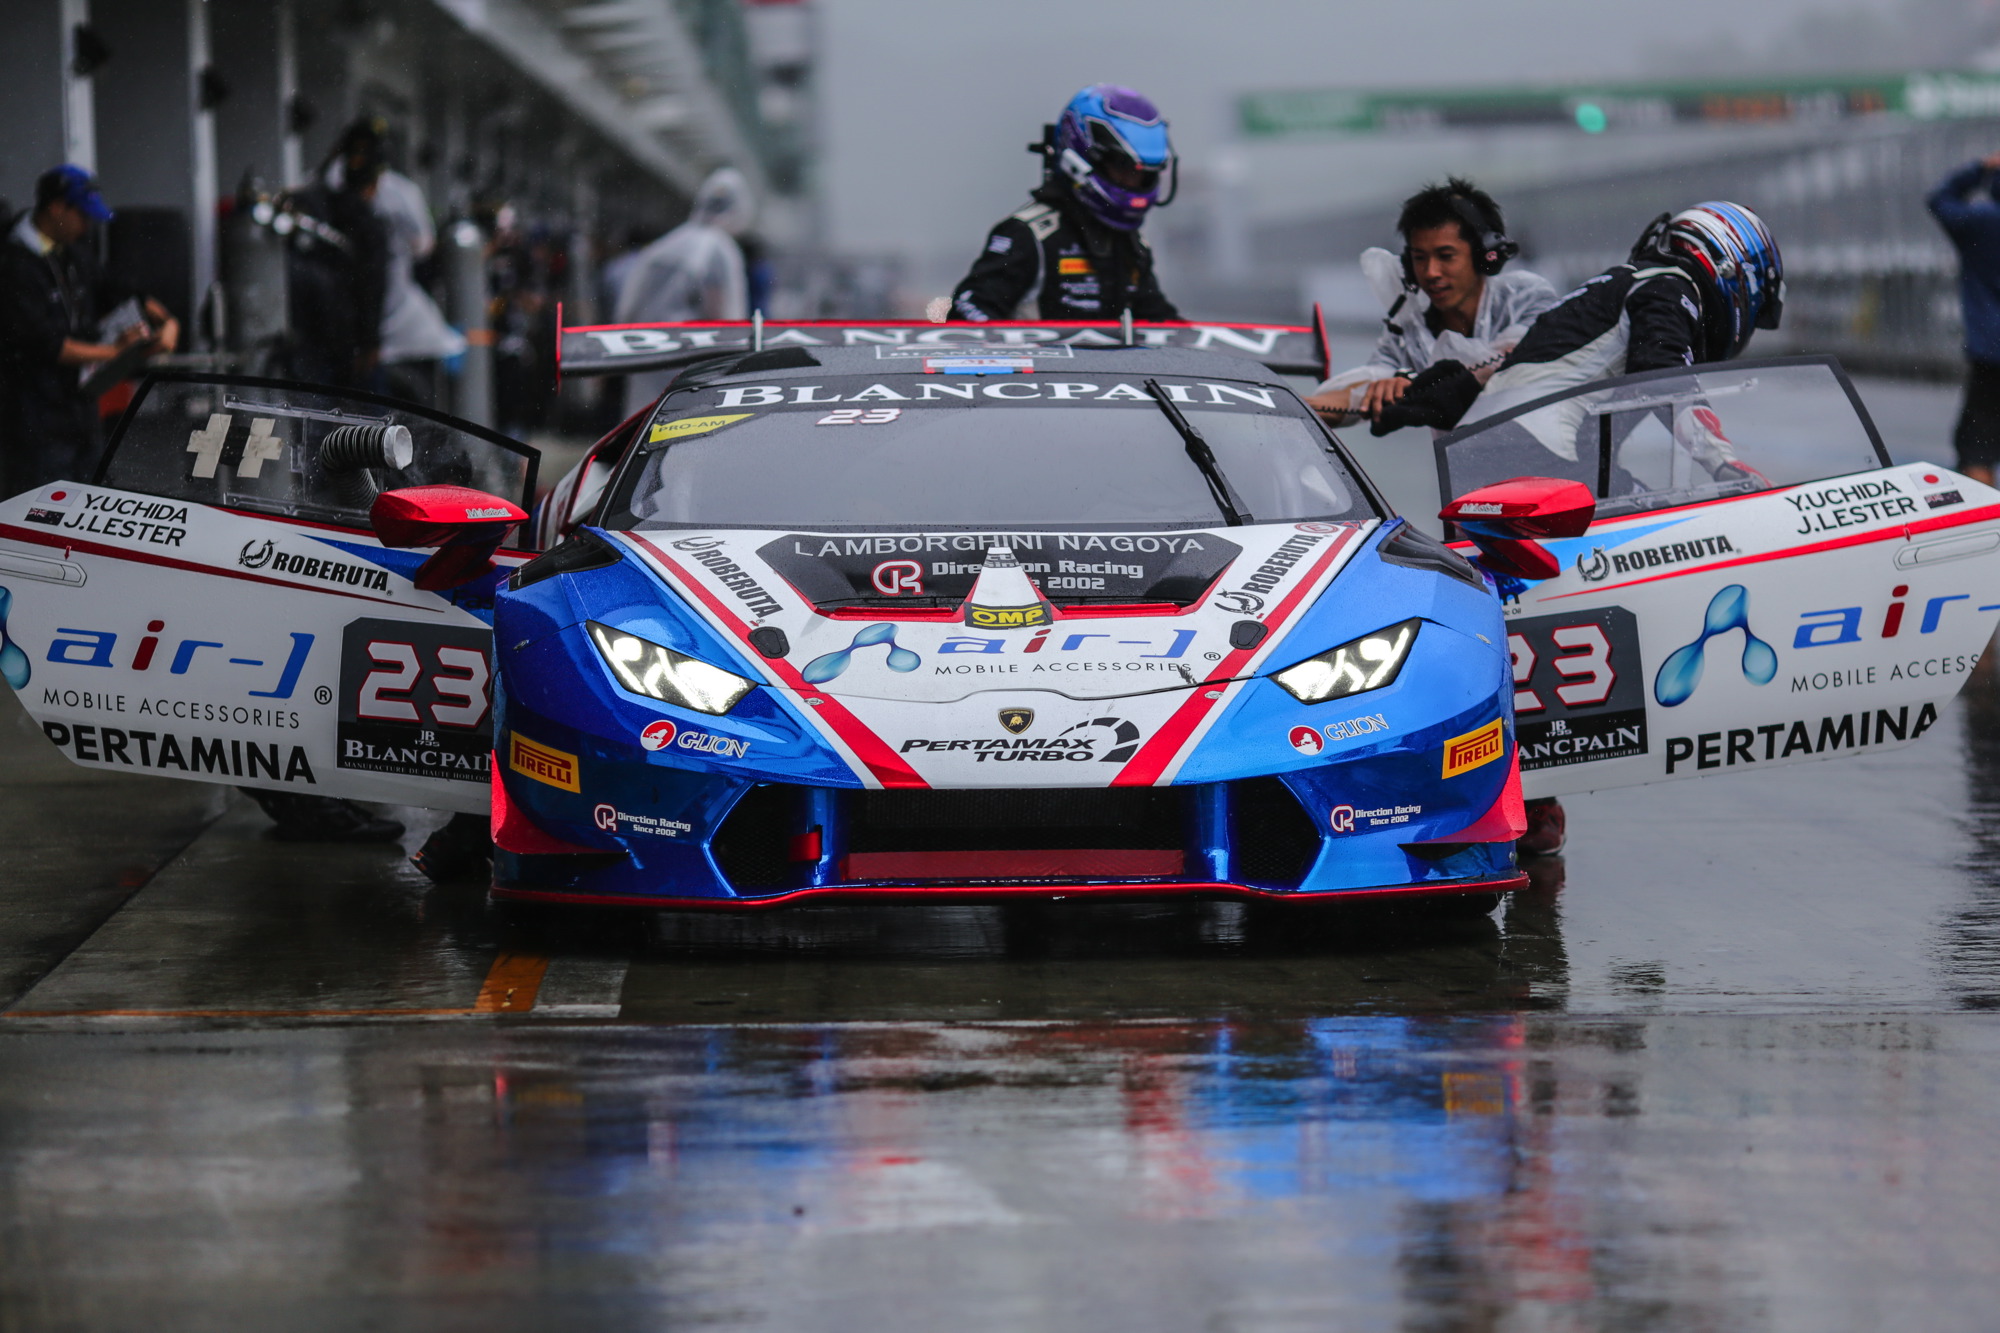 Wet Race At Fuji Speedway Concludes Gloriously    As Lamborghini Blancpain Super Trofeo Prepares For 